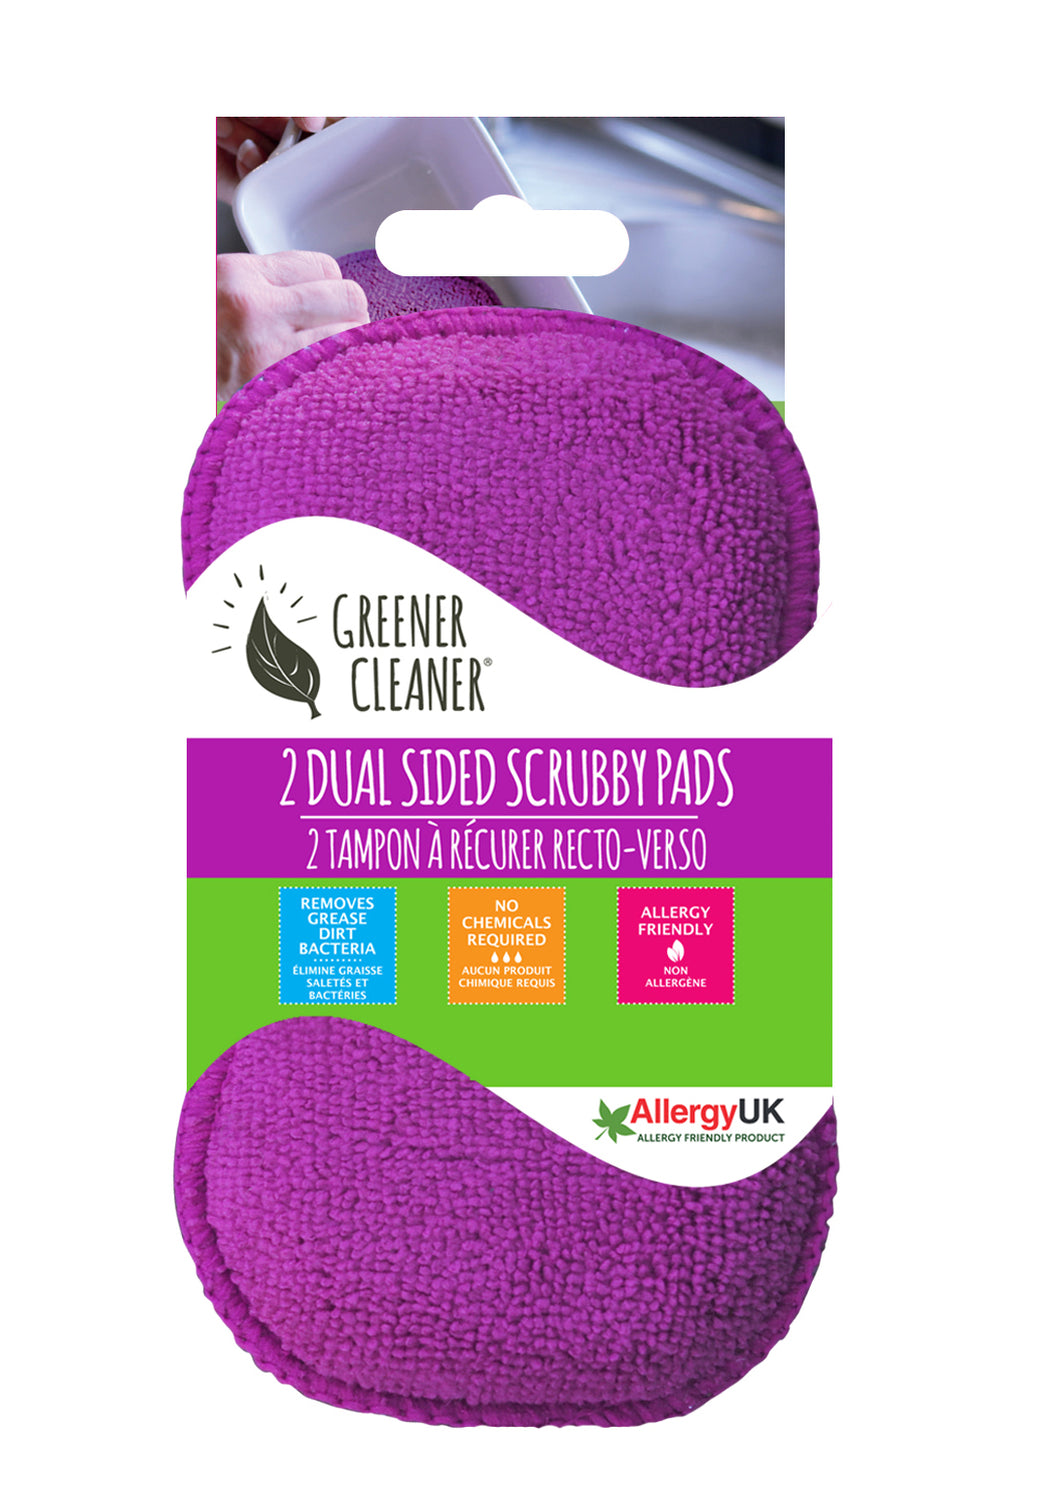 2 Dual Sided Scrubby Pads